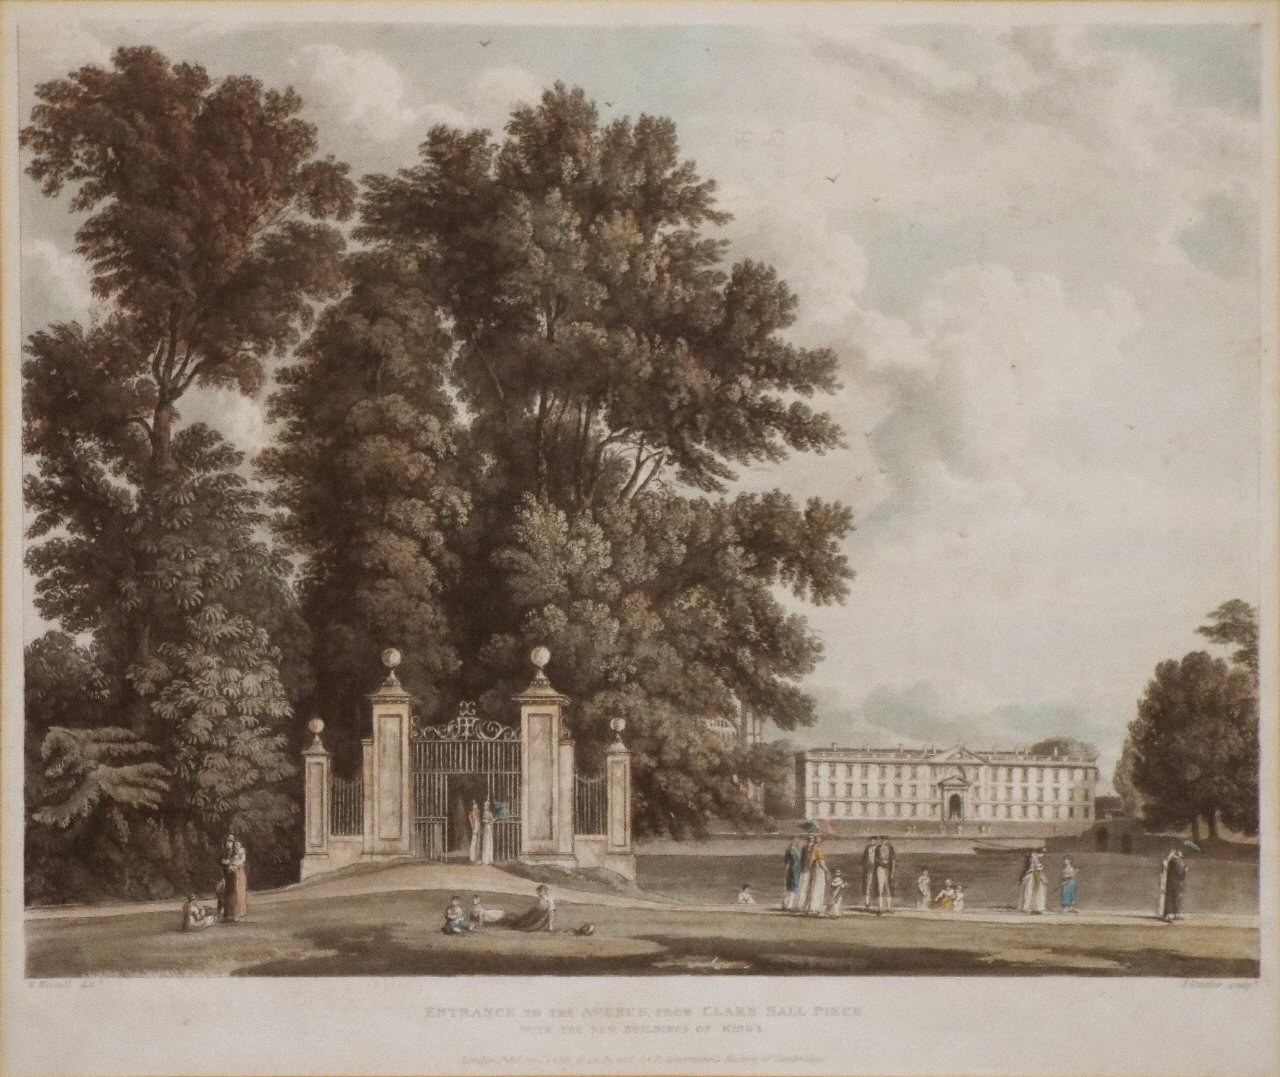 Aquatint - Entrance to the Avenue, from Clare Hall Piece, with the new Buildings of King's. - Stadler